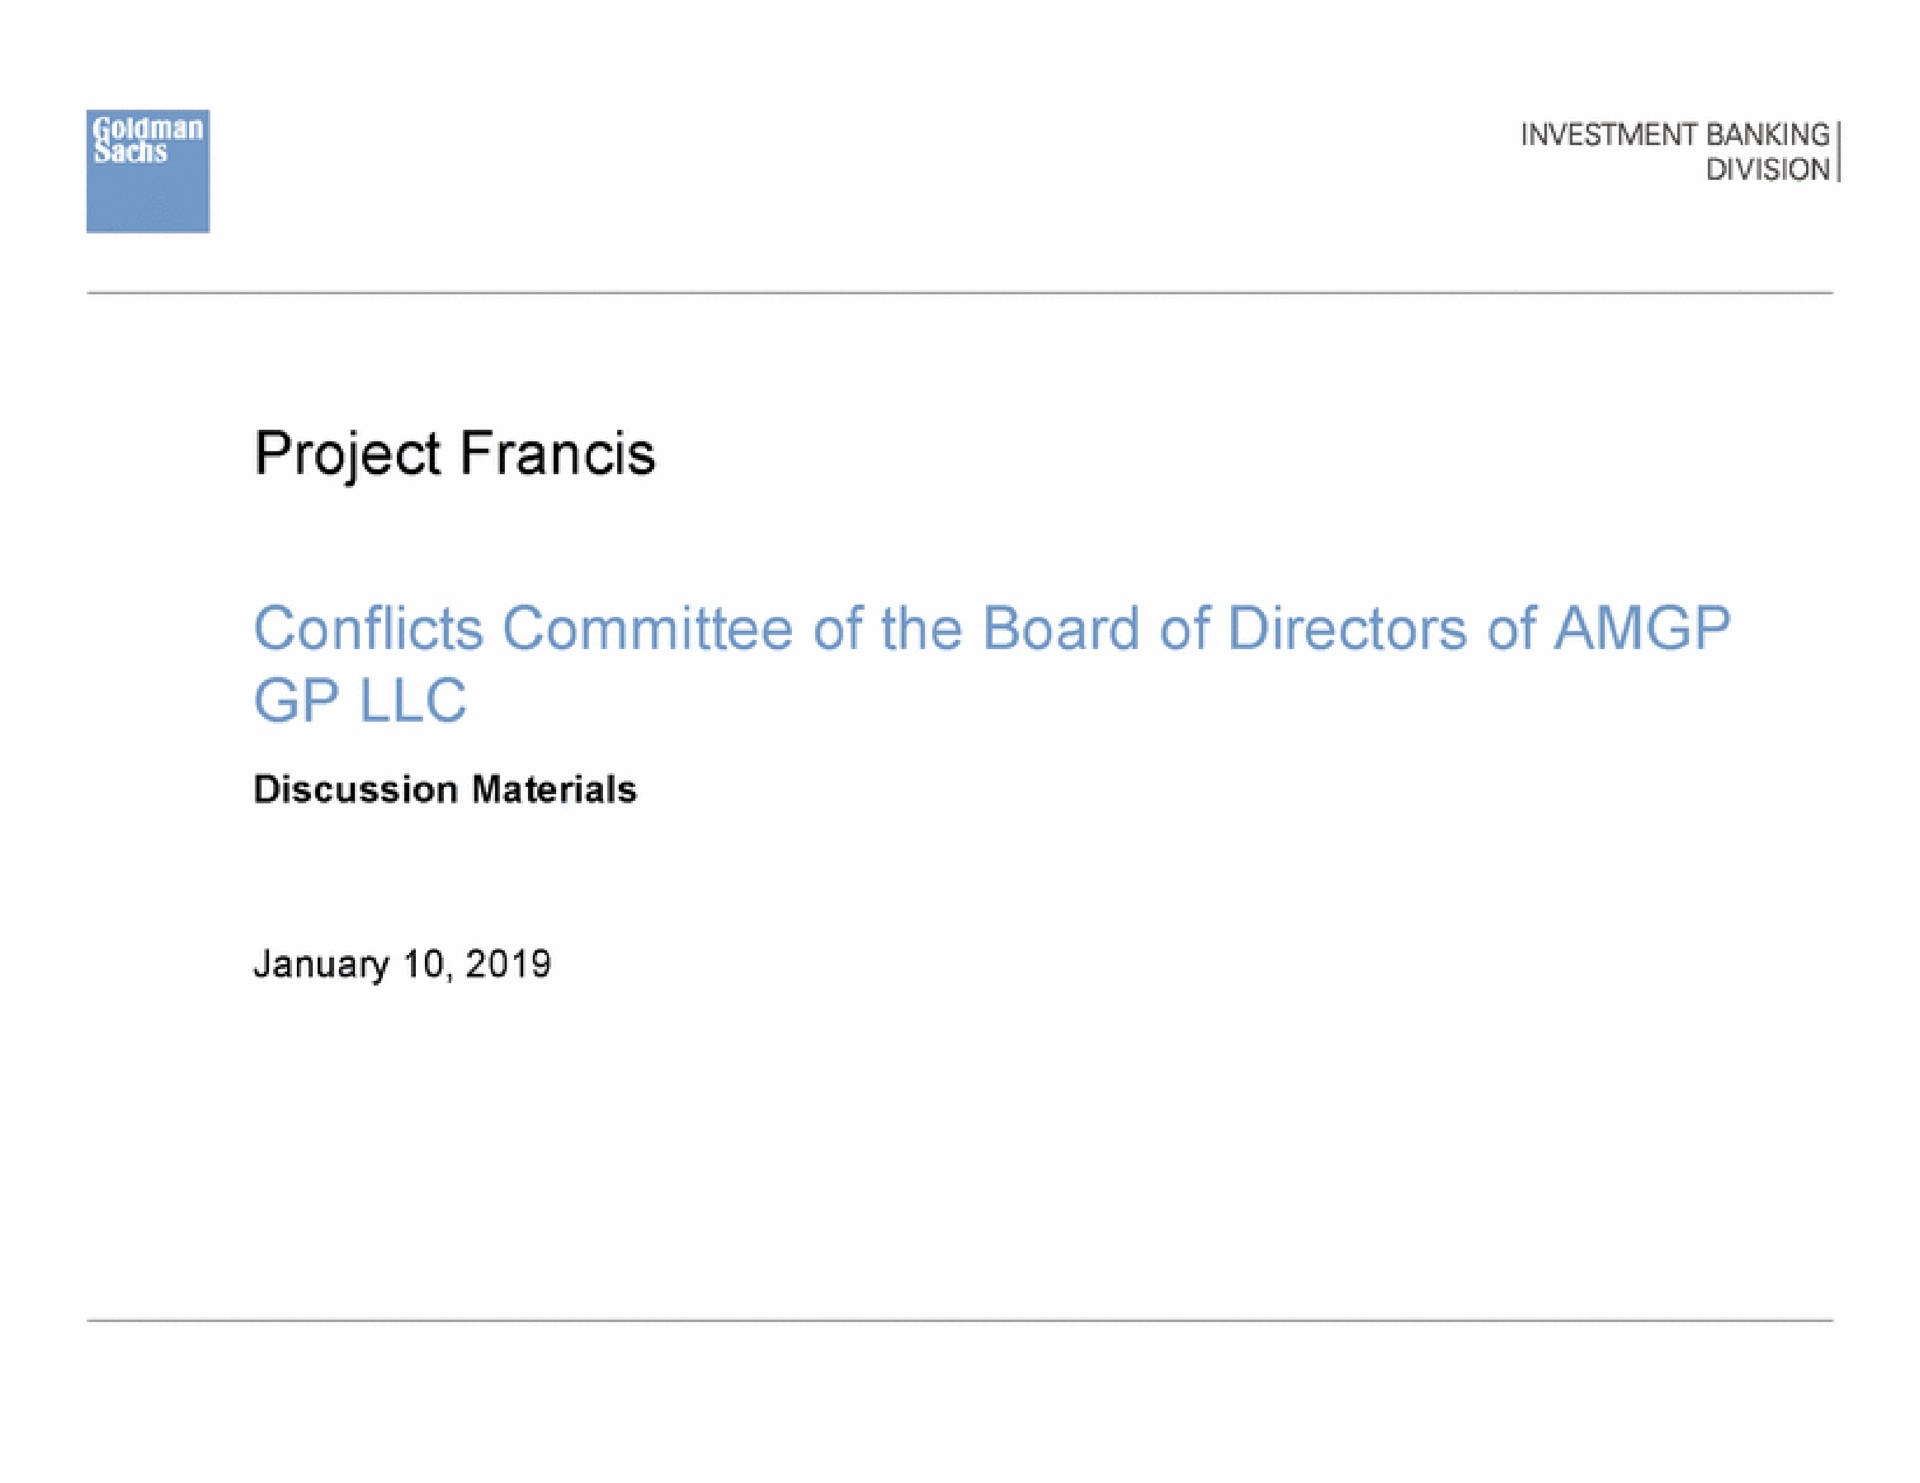 project conflicts committee of the board of directors of | Goldman Sachs